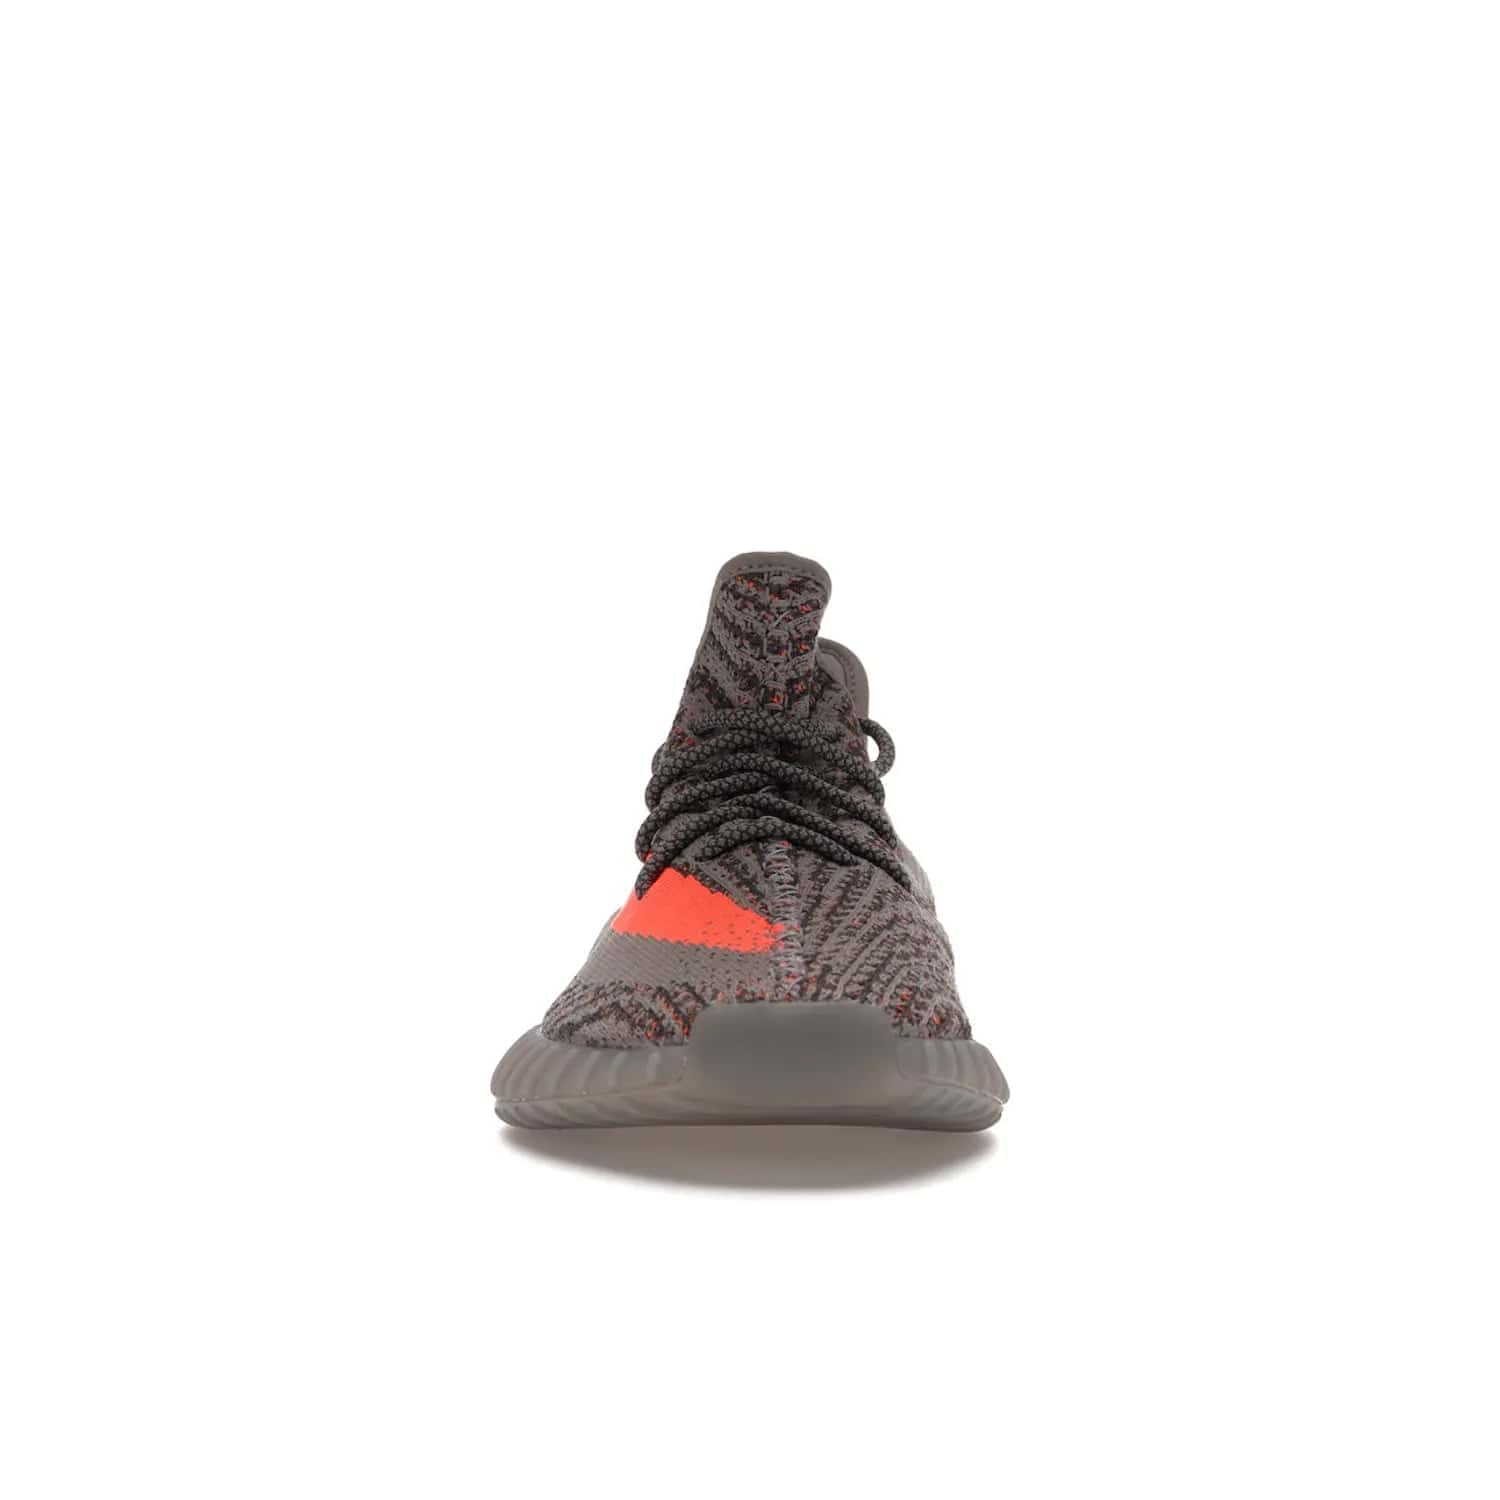 adidas Yeezy Boost 350 V2 Beluga Reflective - Image 10 - Only at www.BallersClubKickz.com - Shop the adidas Yeezy Boost 350 V2 Beluga Reflective: a stylish, reflective sneaker that stands out. Featuring Boost sole, Primeknit upper & signature orange stripe. Available Dec 2021.